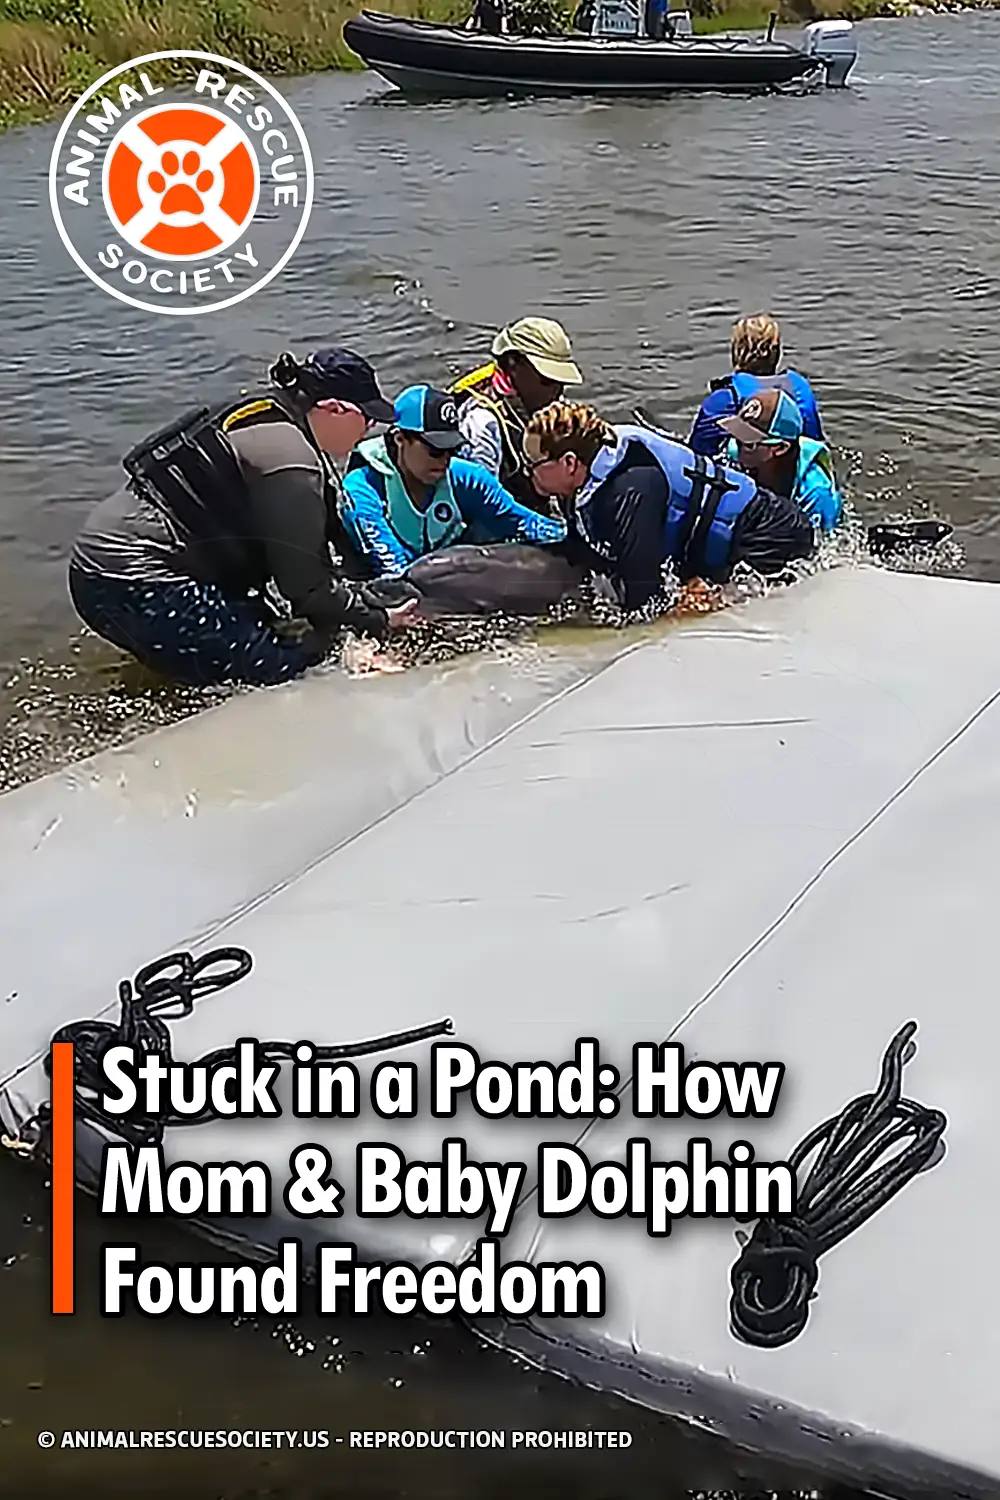 Stuck in a Pond: How Mom & Baby Dolphin Found Freedom